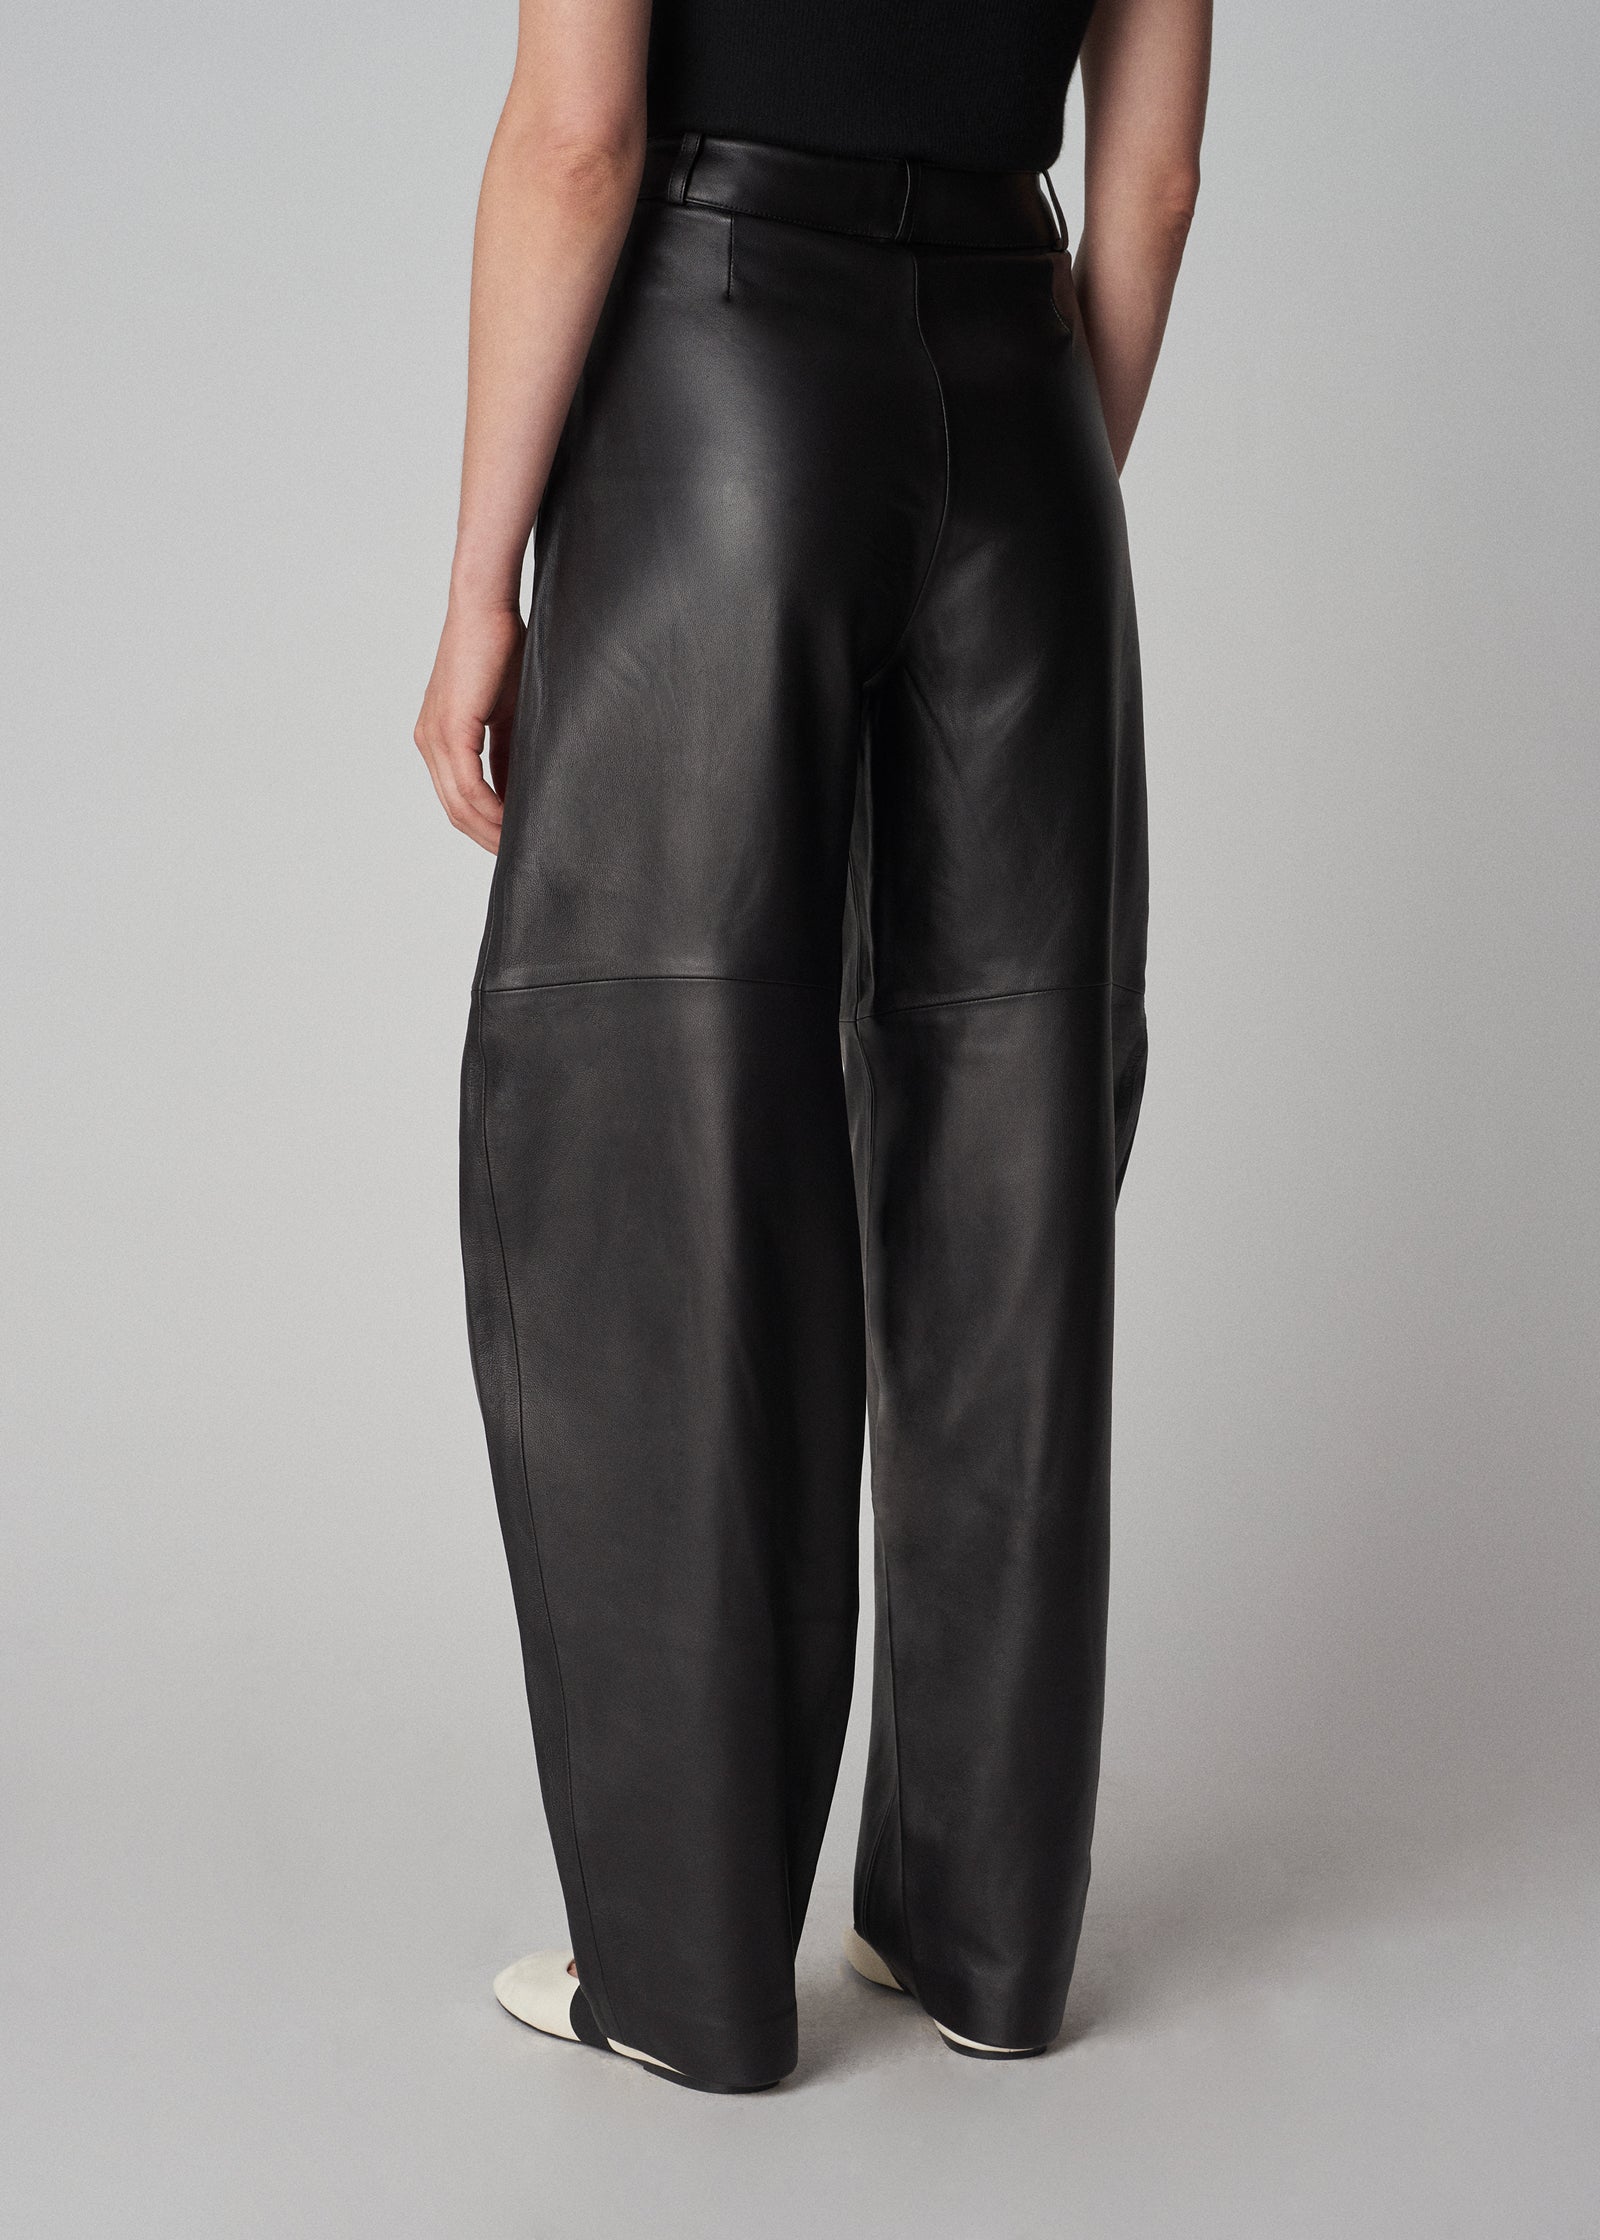 High Waist Curve Seam Pant in Leather - Black - CO Collections